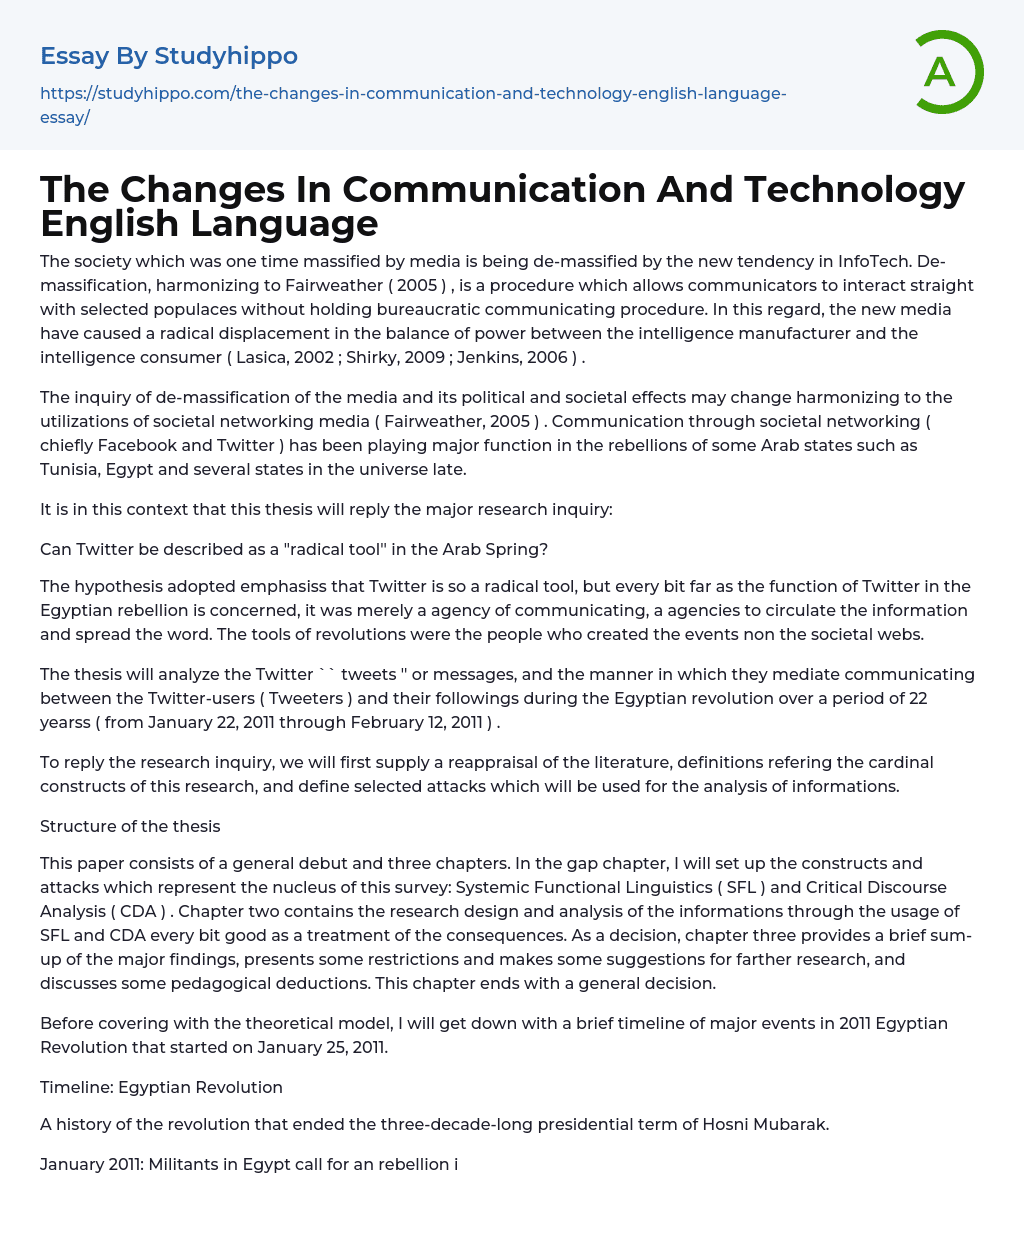 The Changes In Communication And Technology English Language Essay Example